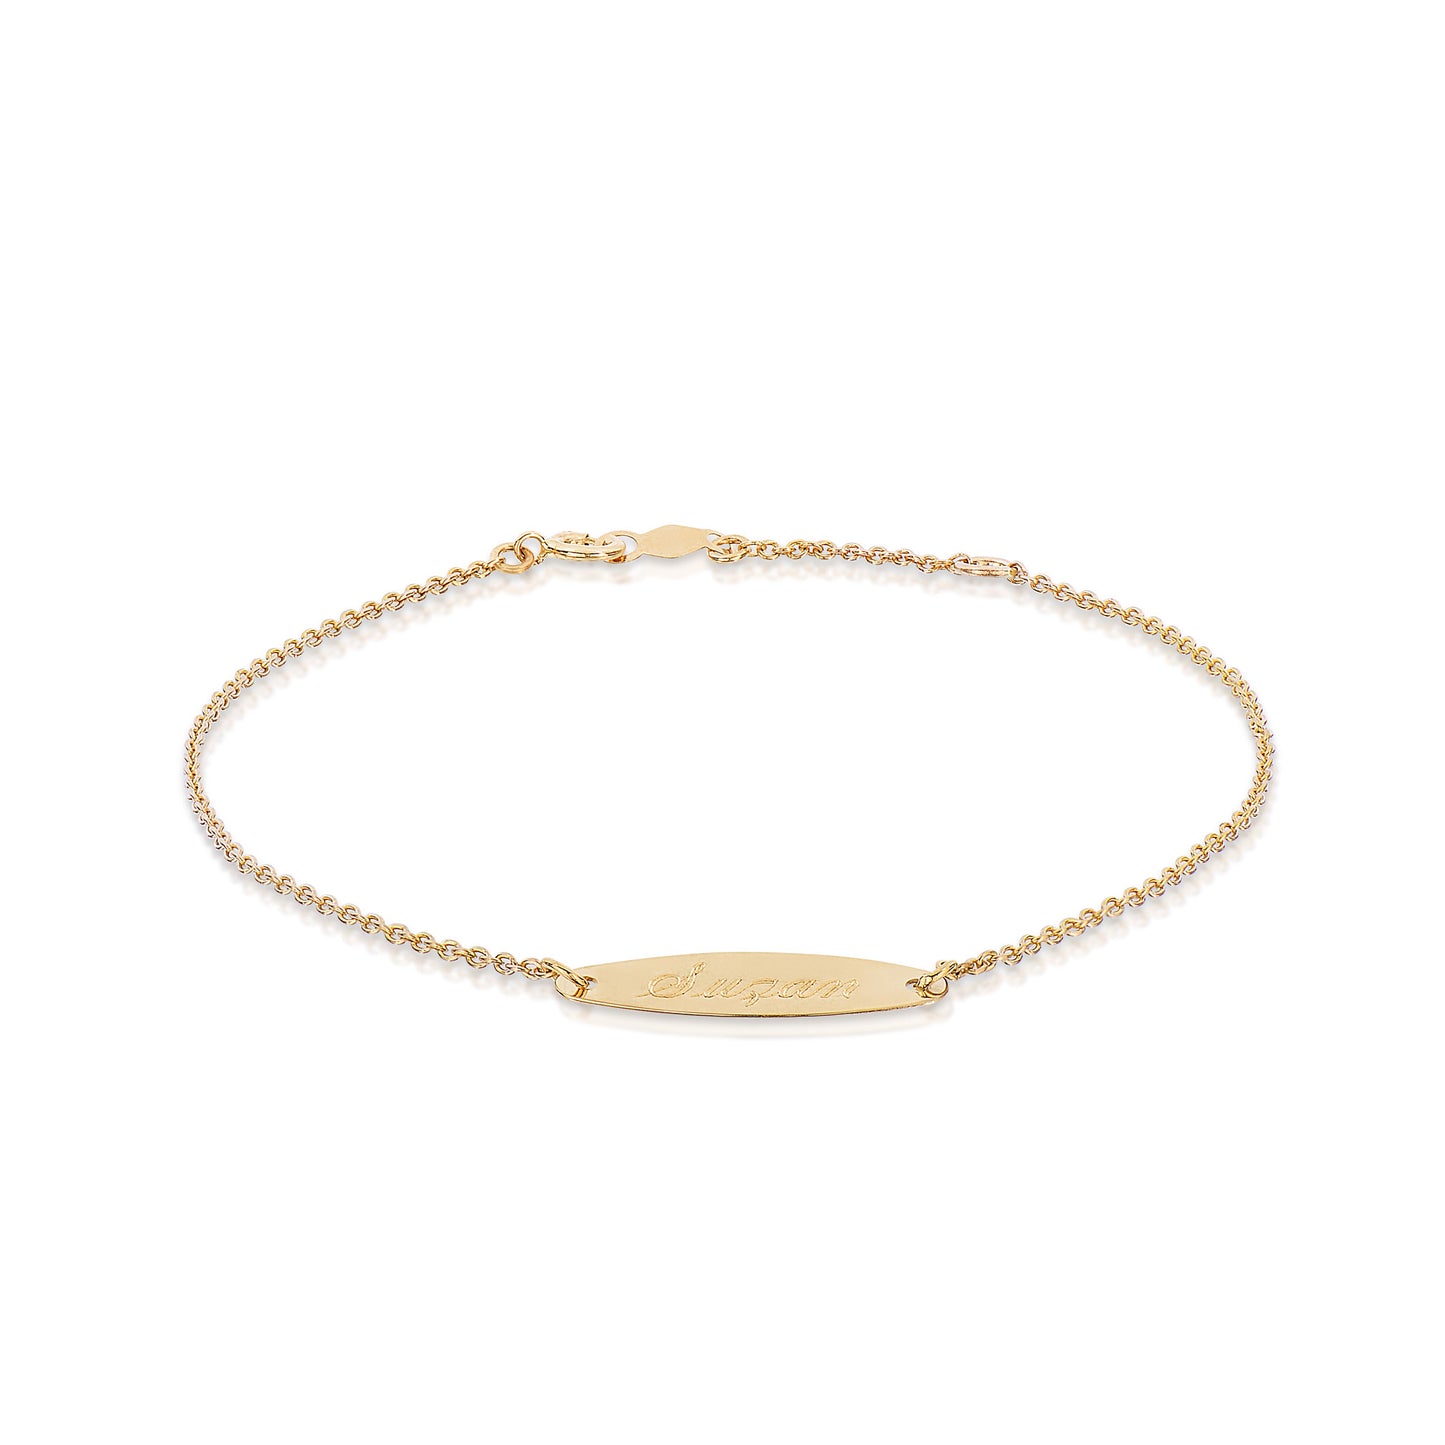 Engrave Anything Oval ID Bracelet 14k Gold